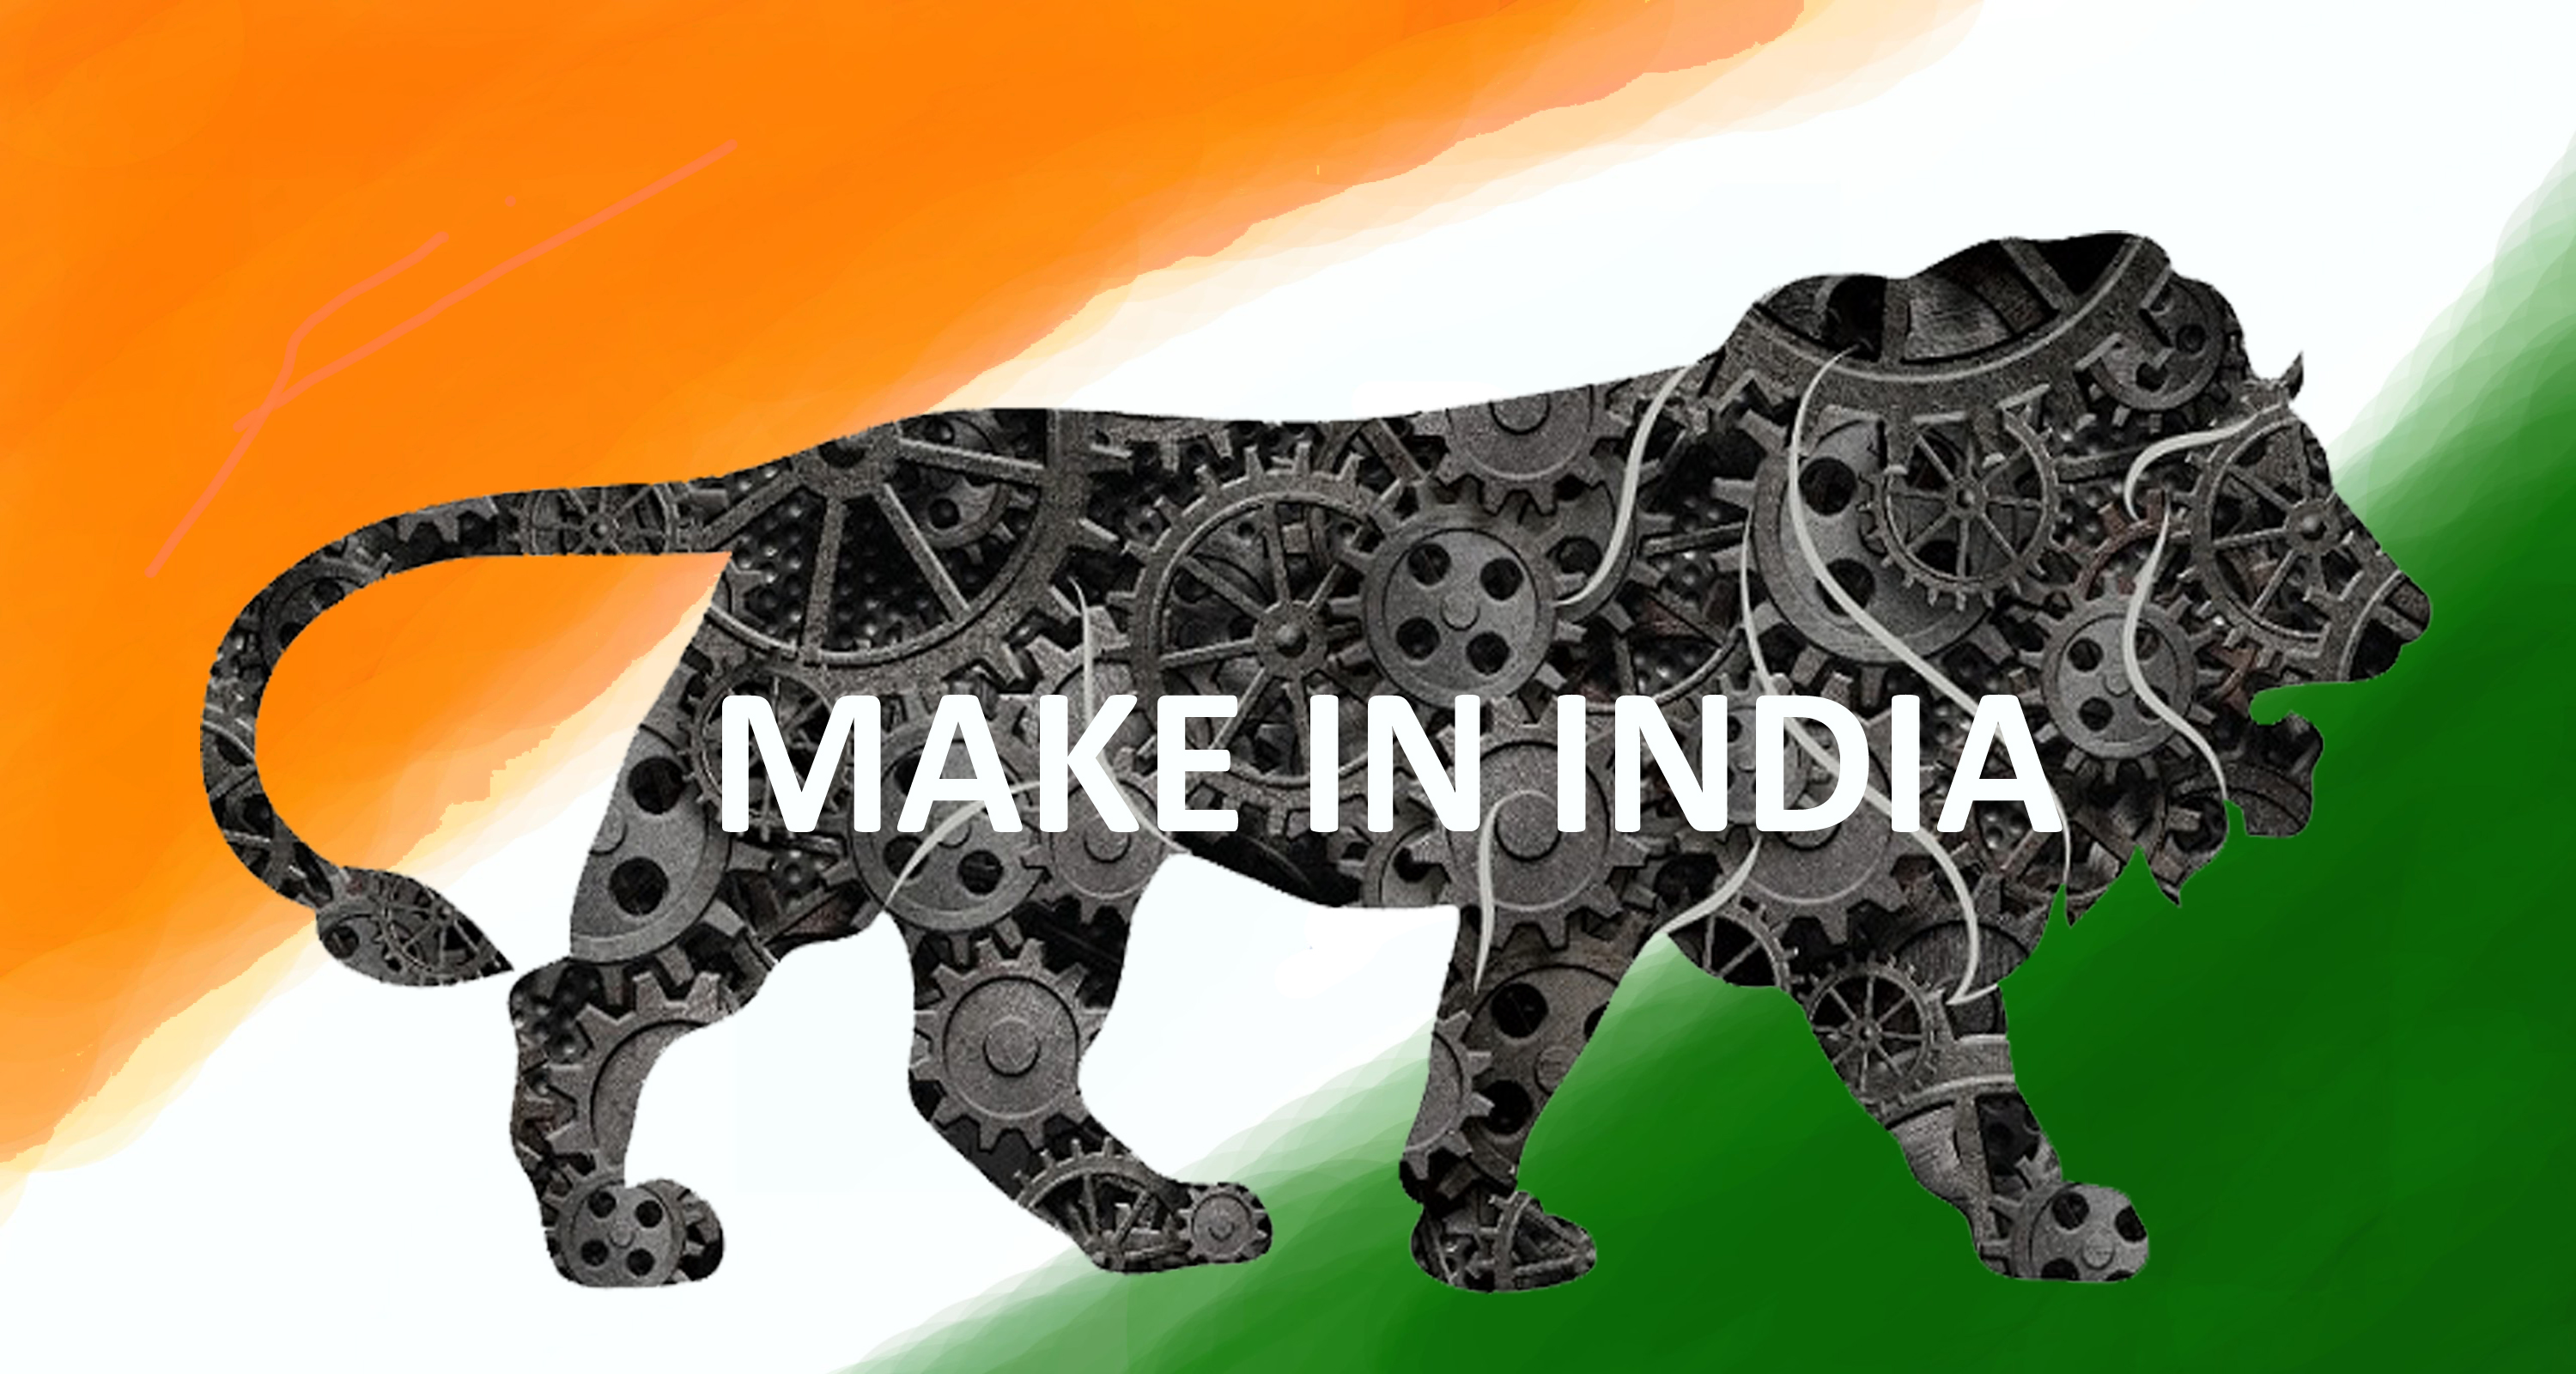 [Make in India? ] Allegation Of Govt Discriminating Against Indian Bidders: Delhi HC Directs PMO To Bring It To The Attention Of PM If Bidder Files Representation